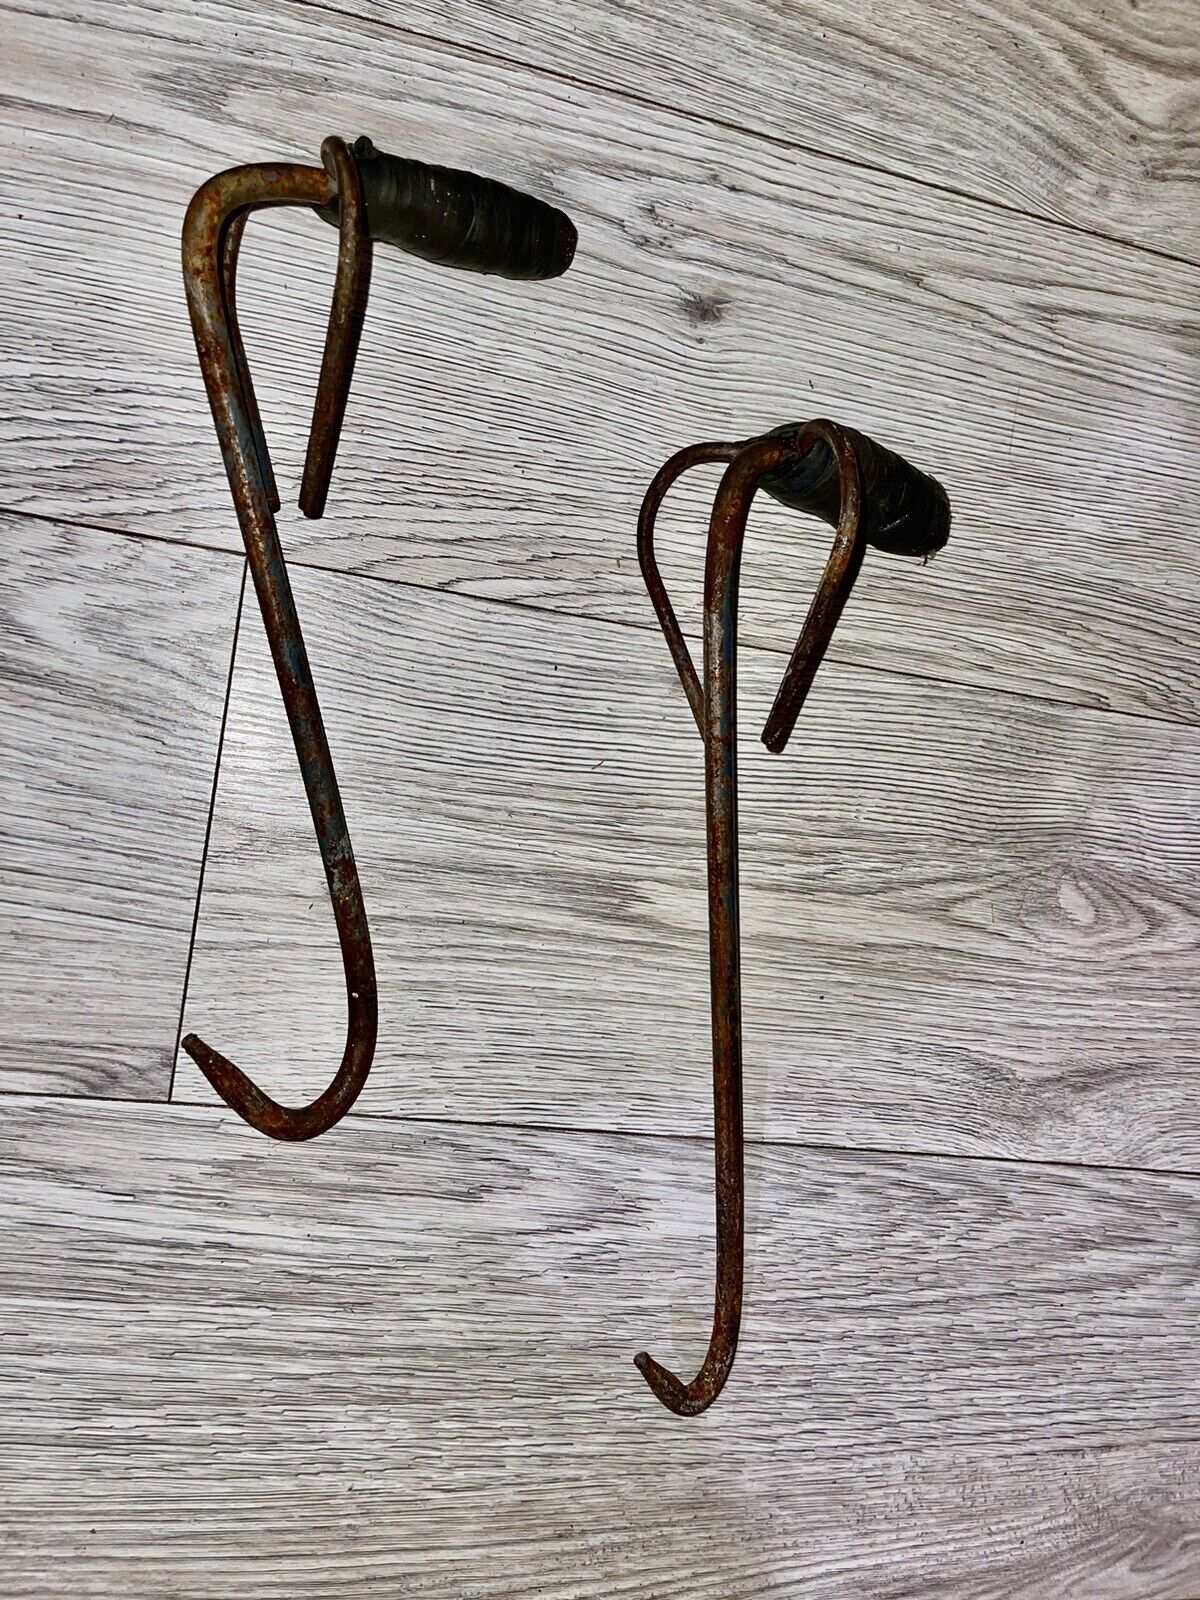 2 Vintage/Antique Unique Iron Metal Hay Hooks. One 15” And One 13 1/2”.